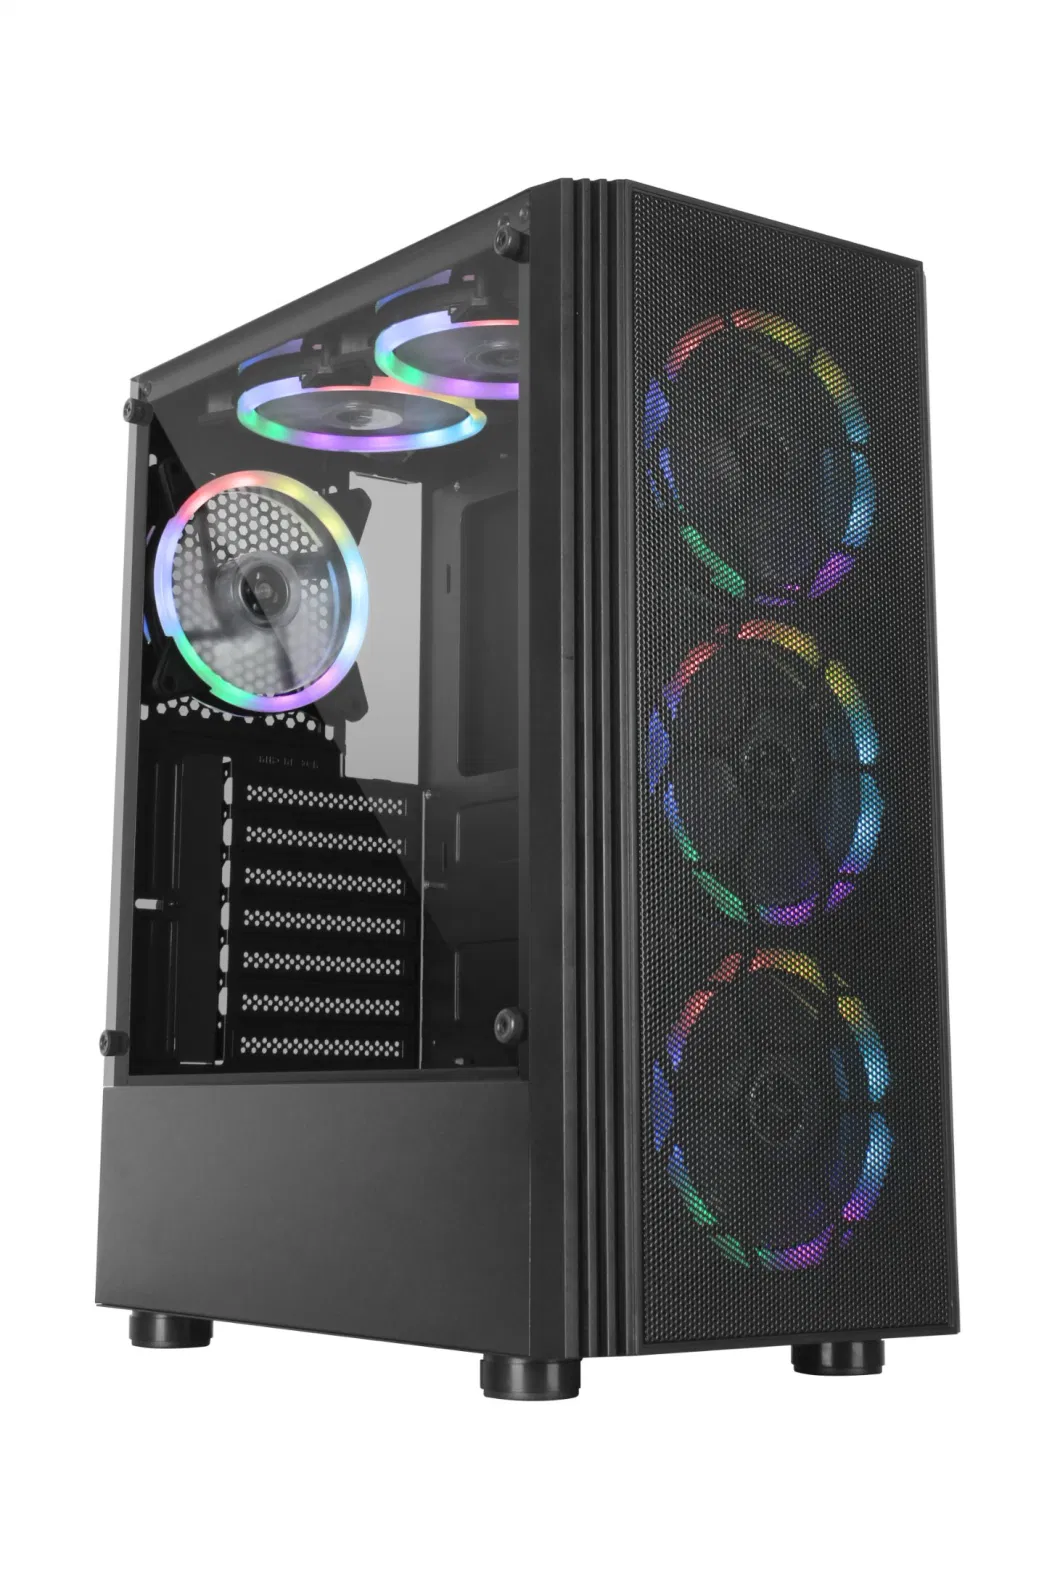 Hot-Selling ATX Desktop Computer PC Gaming Case with RGB Fan